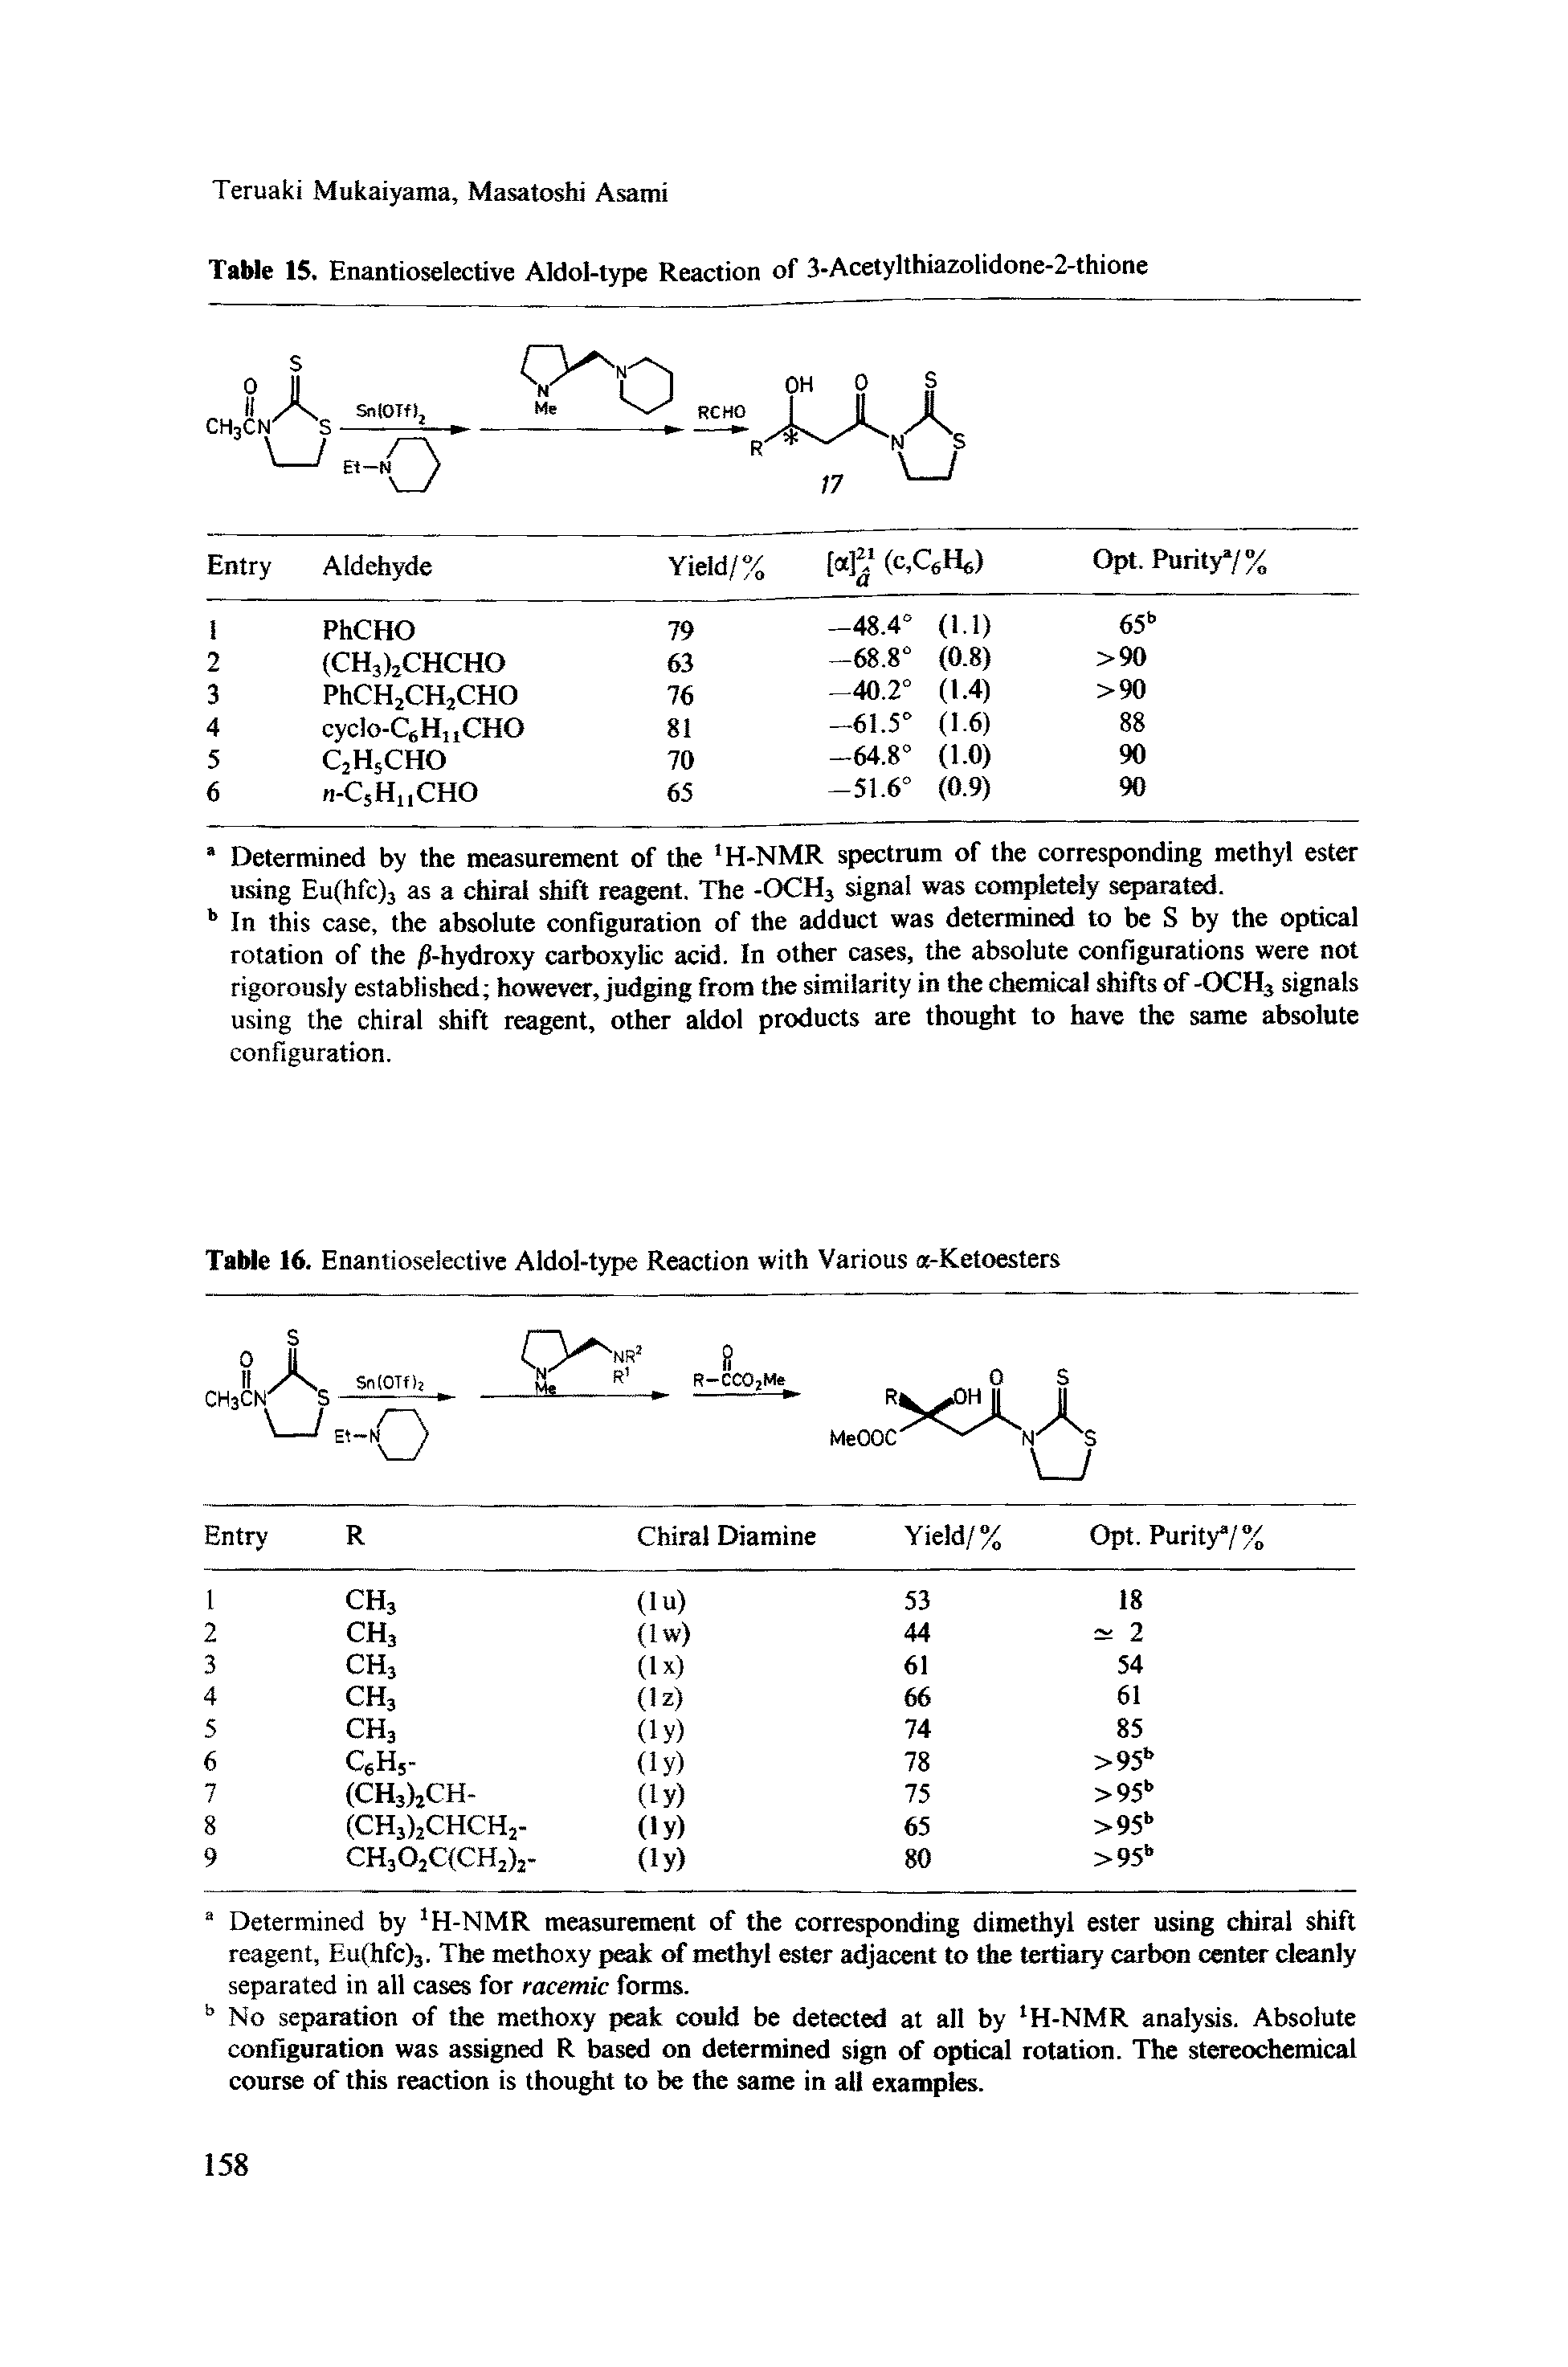 Table 16. Enantioselective Aldol-type Reaction with Various a-Ketoesters...